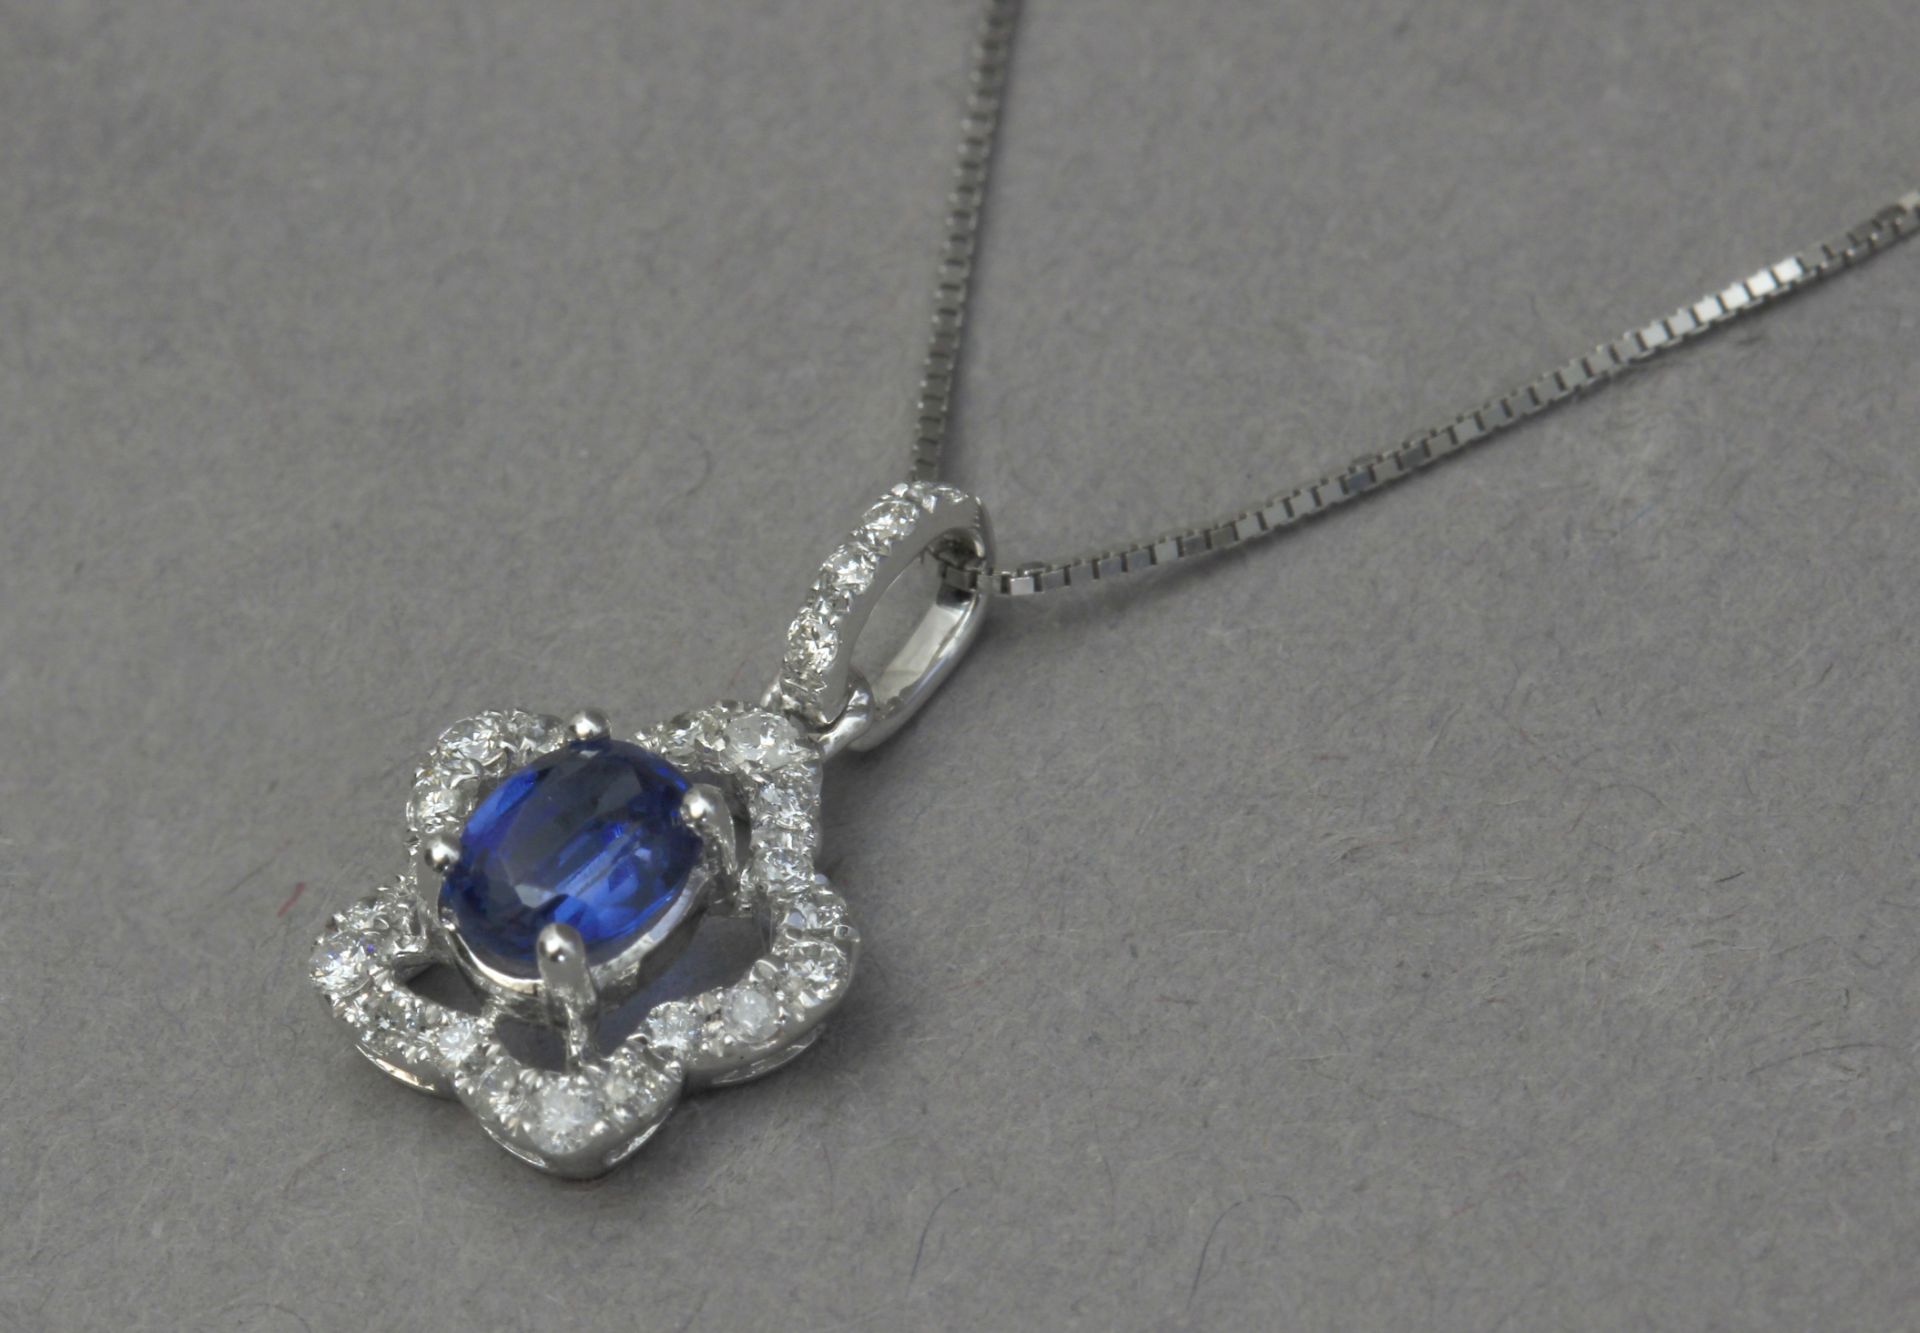 A kyanite and diamond pendant with an 18k. white gold chain - Image 2 of 6